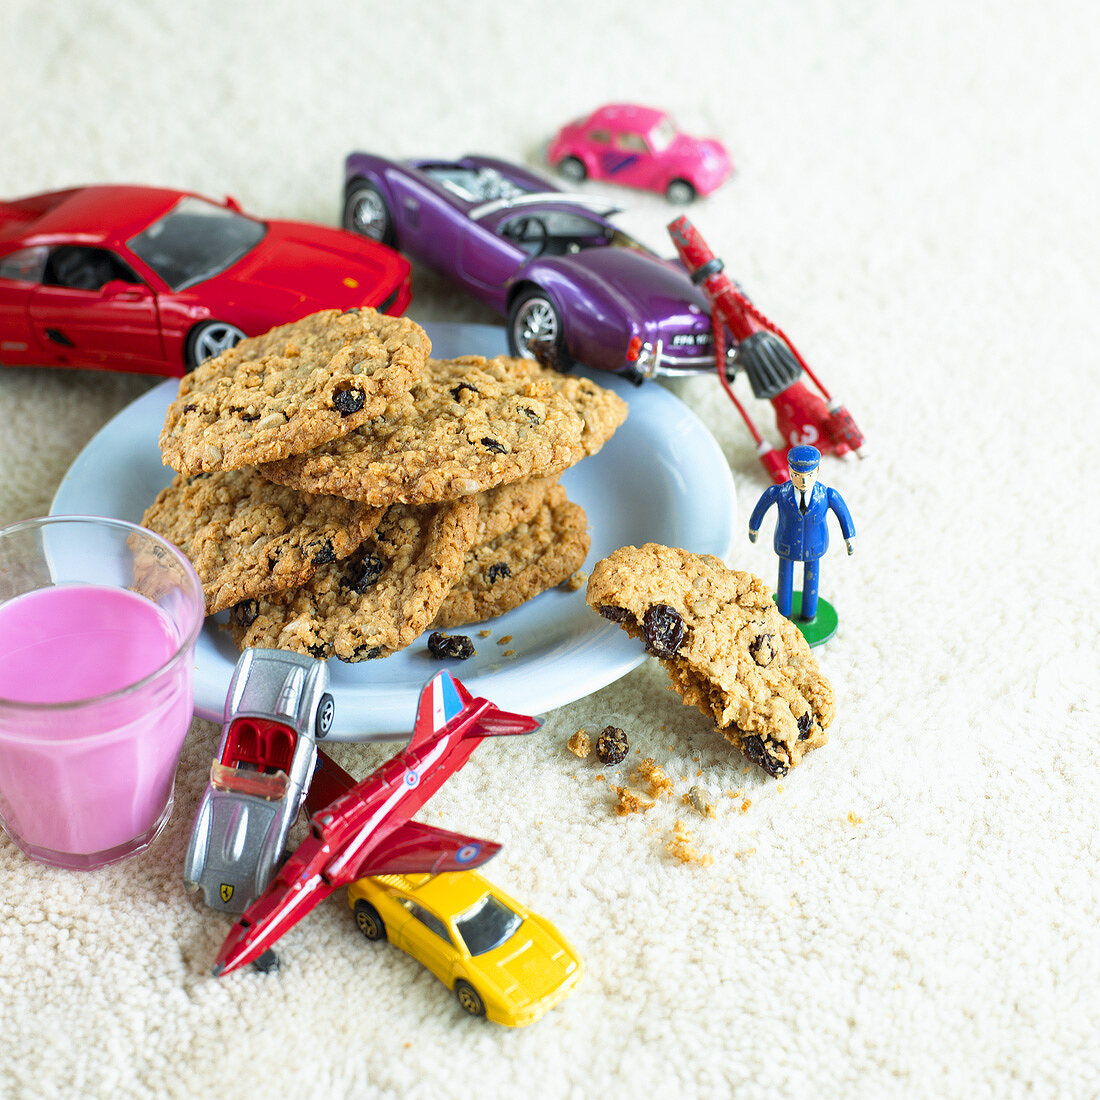 Oat and raisin biscuits, berry milk and toy cars